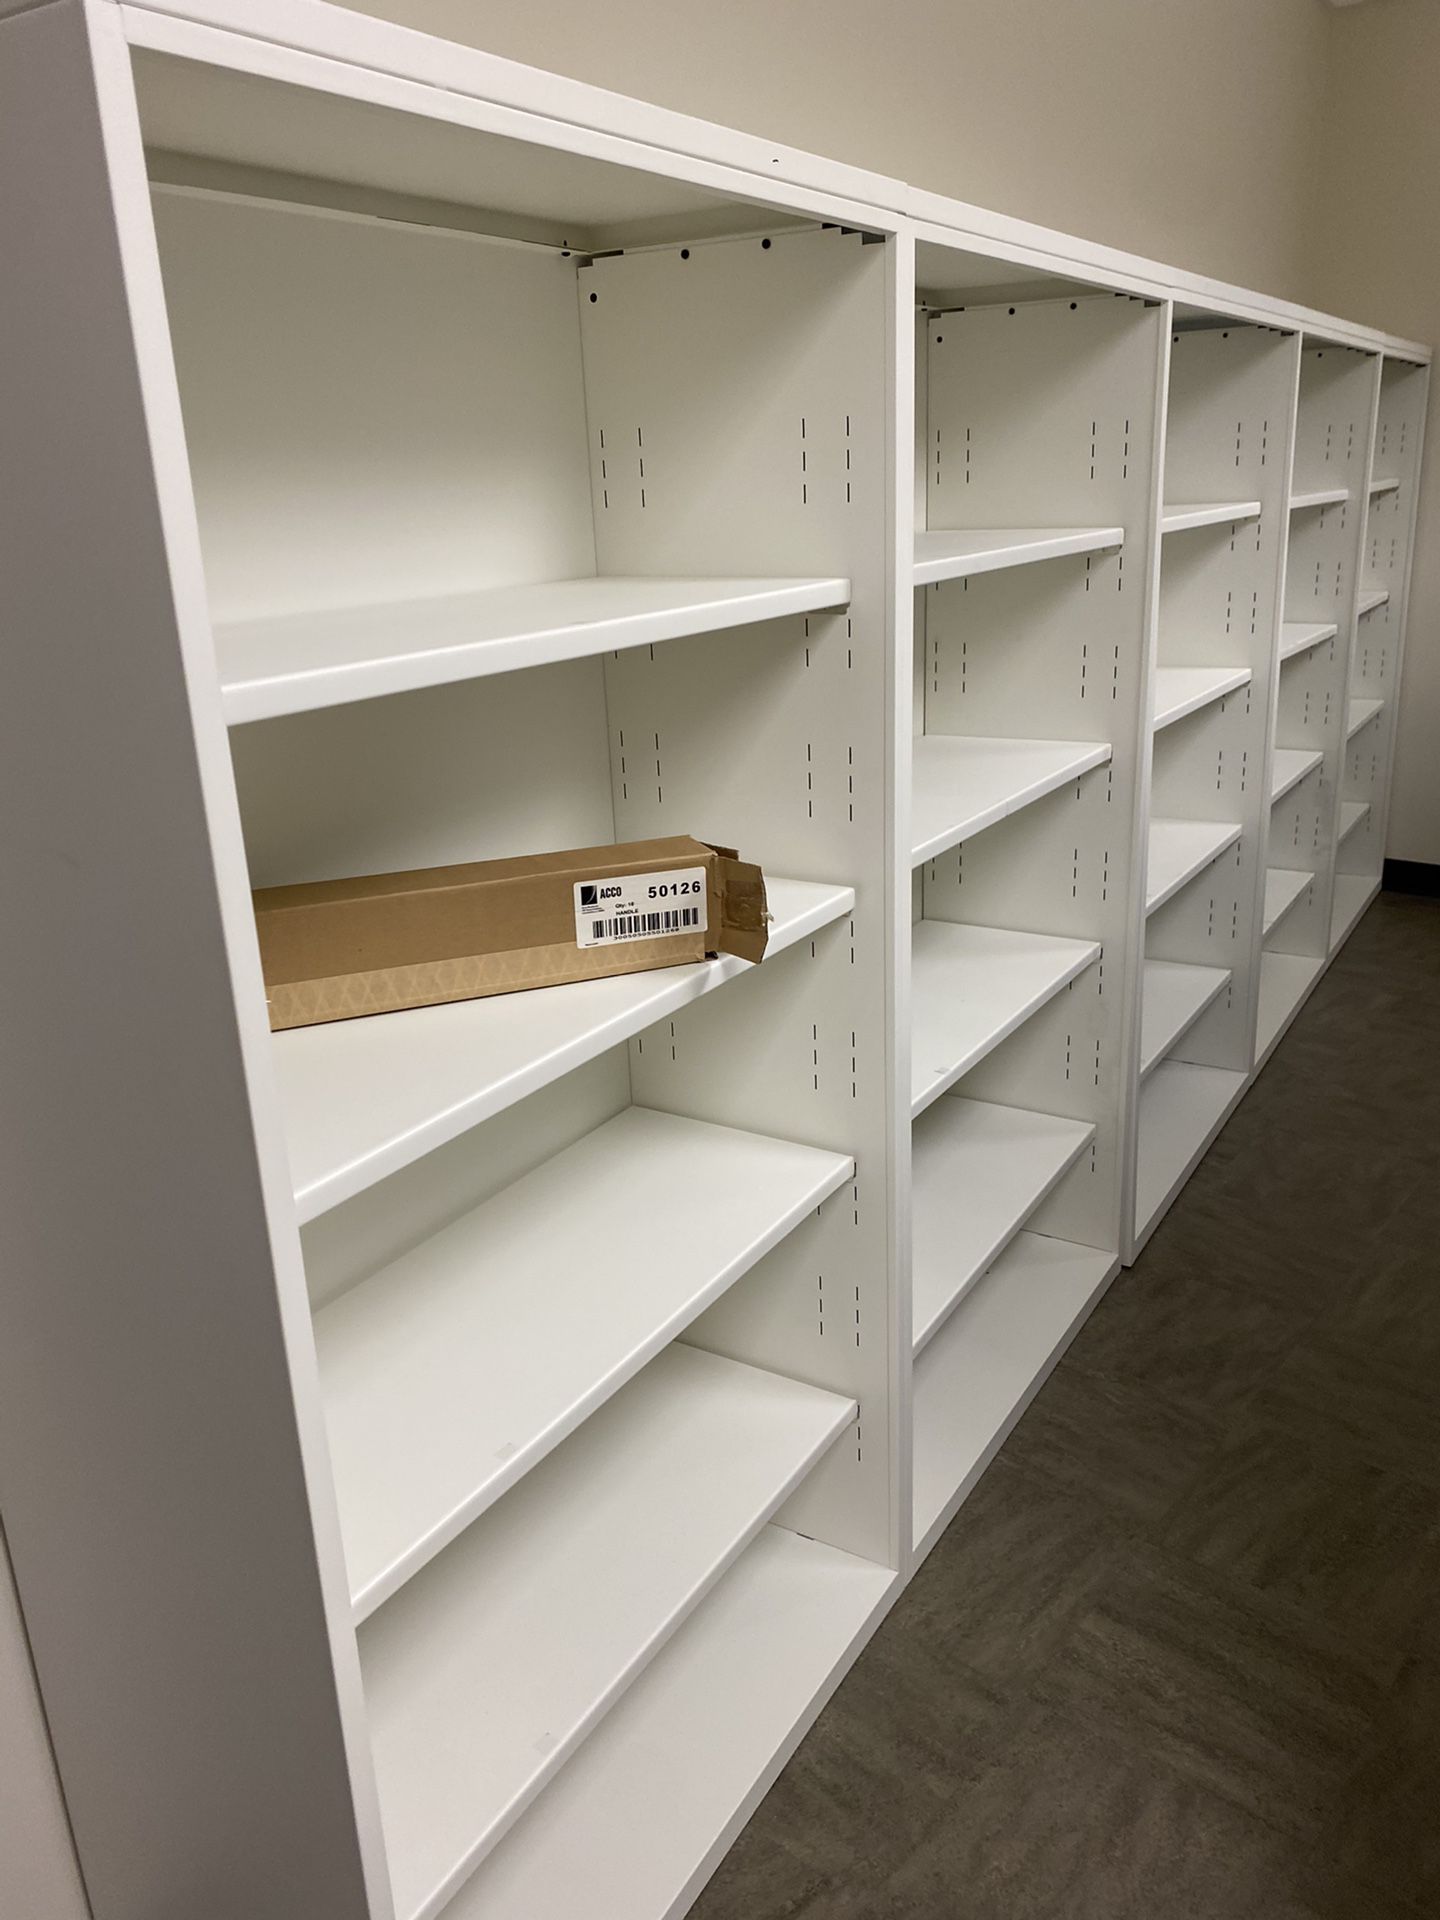 Steelcase white bookcases